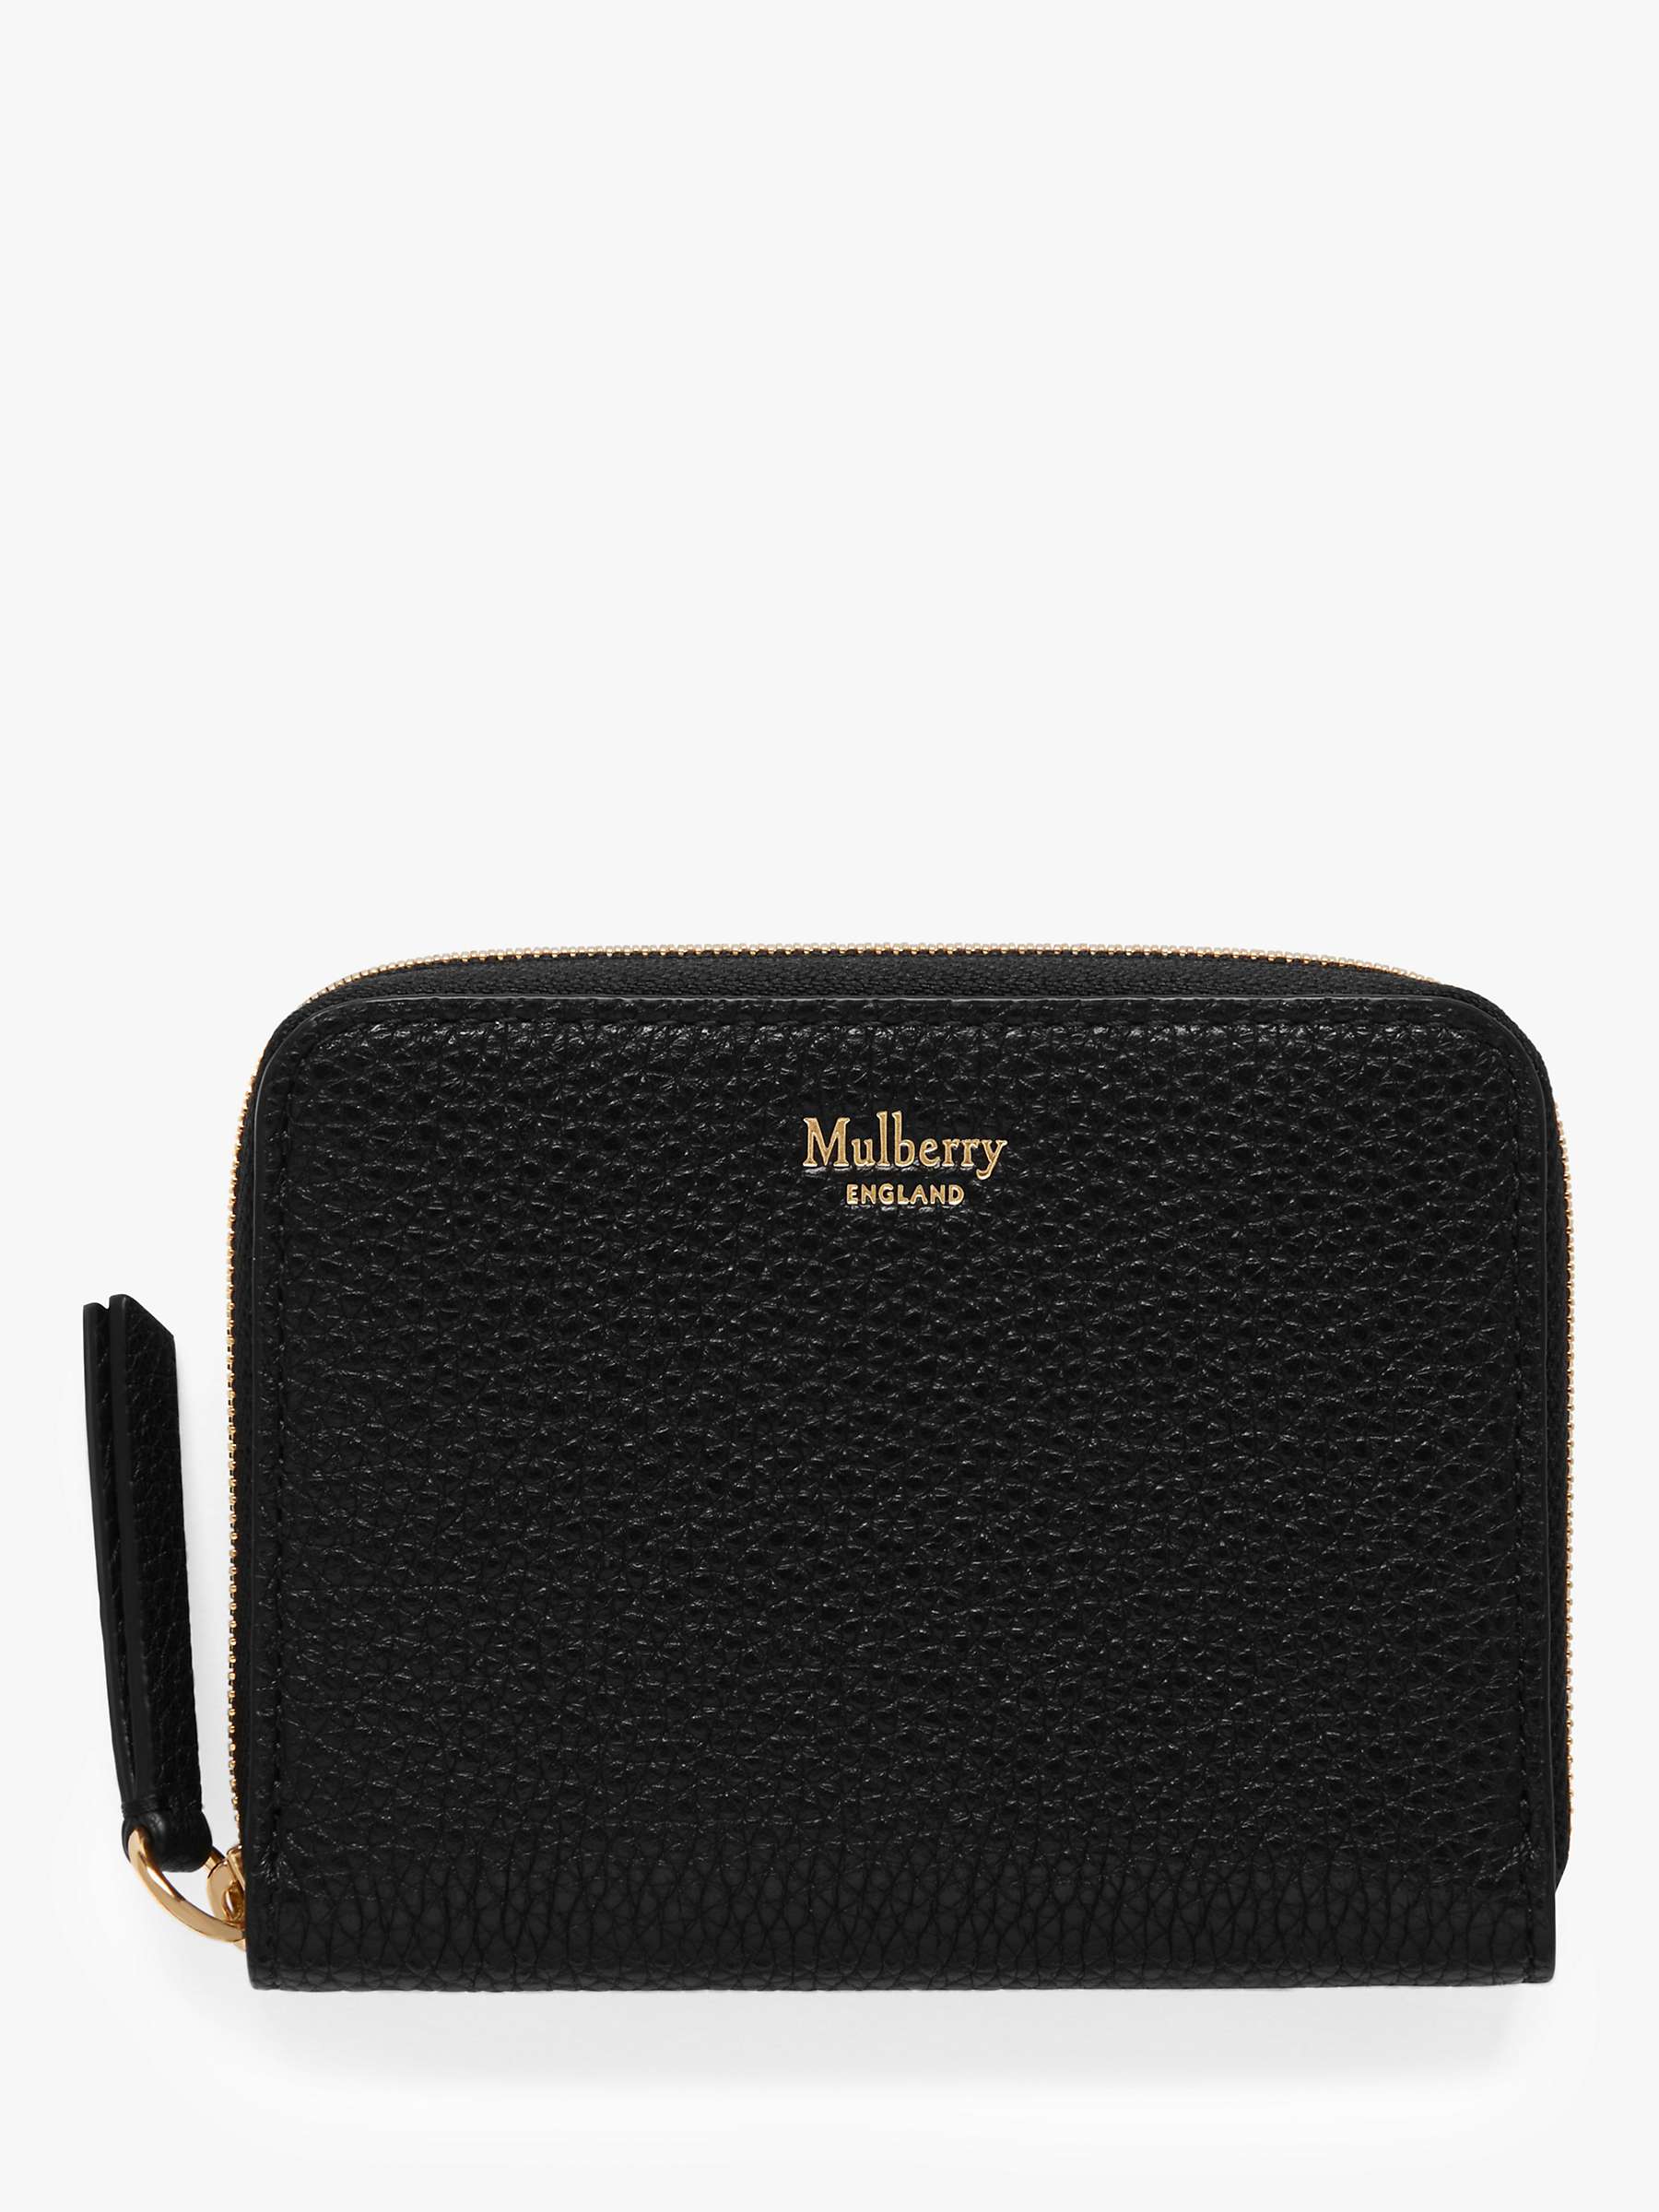 Buy Mulberry Classic Grain Leather Small Zip-Around Purse Online at johnlewis.com